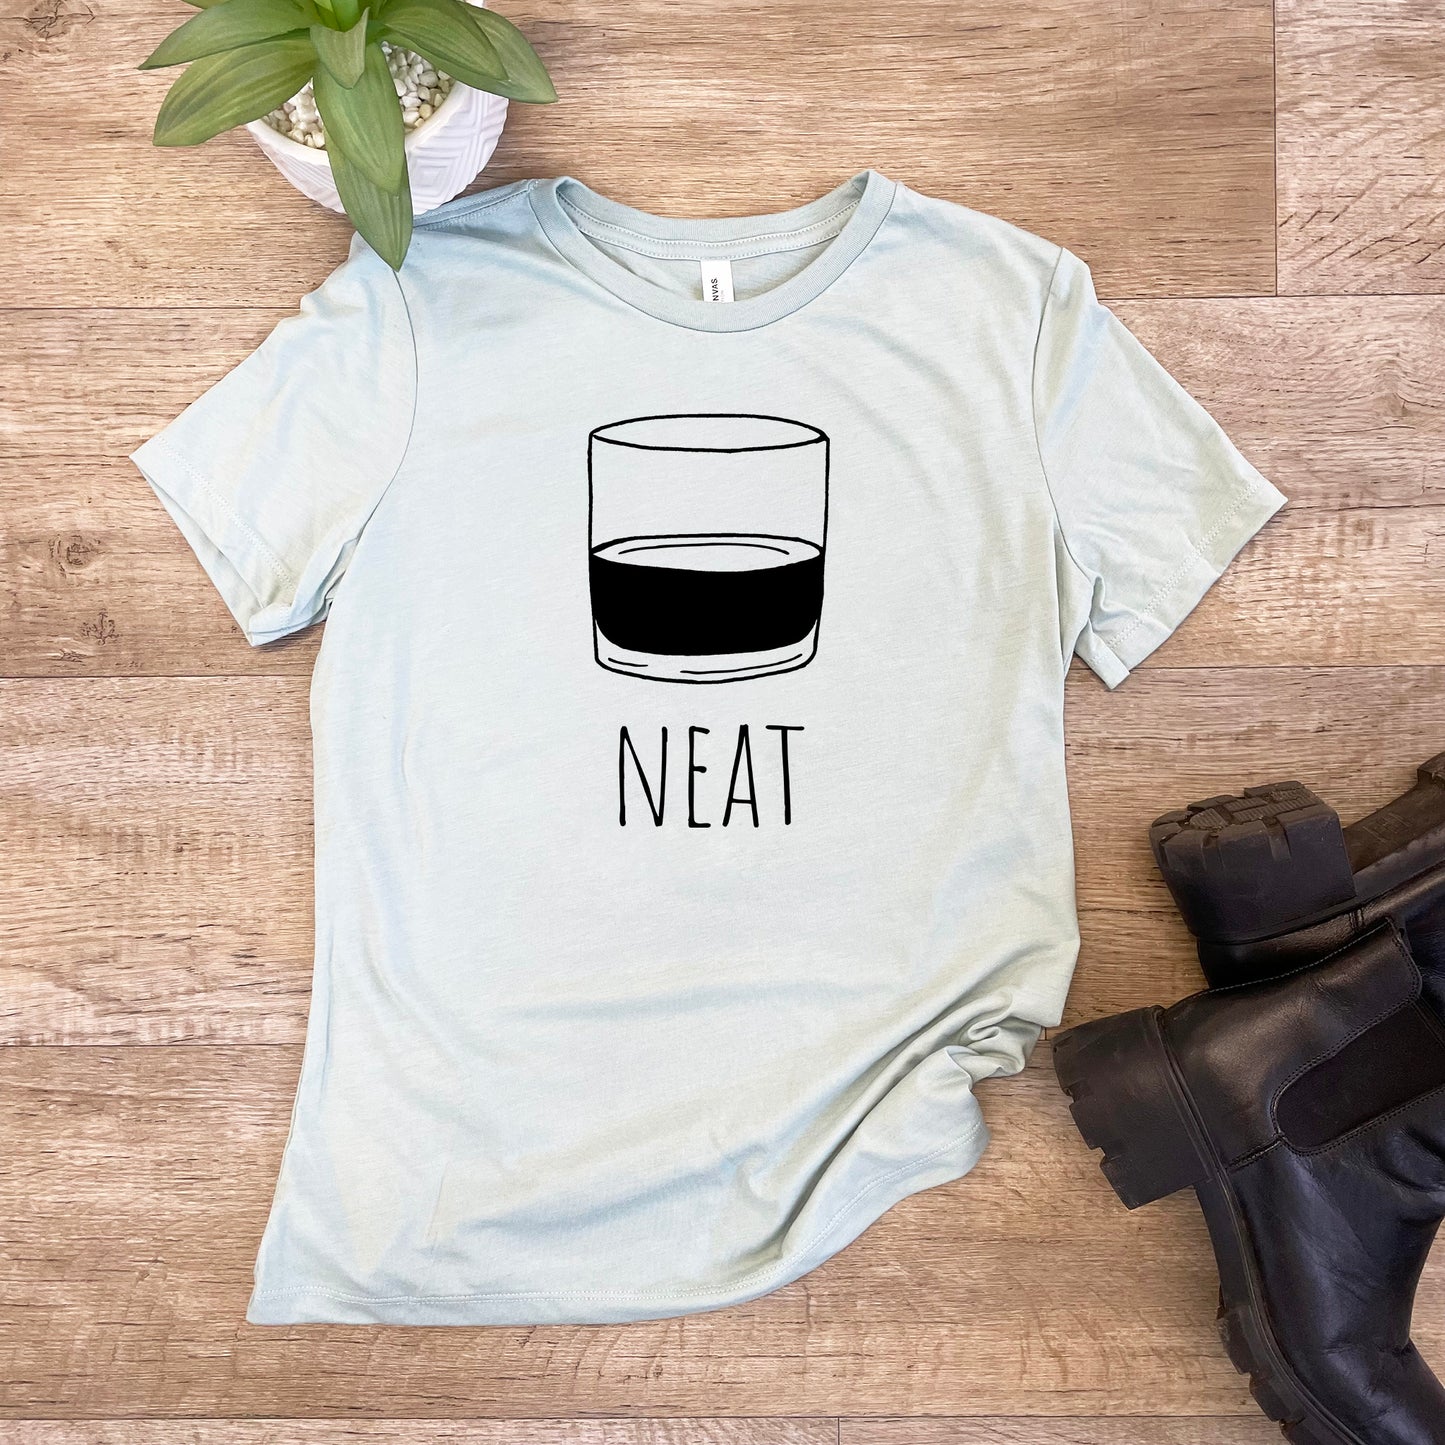 Neat (Whiskey) - Women's Crew Tee - Olive or Dusty Blue